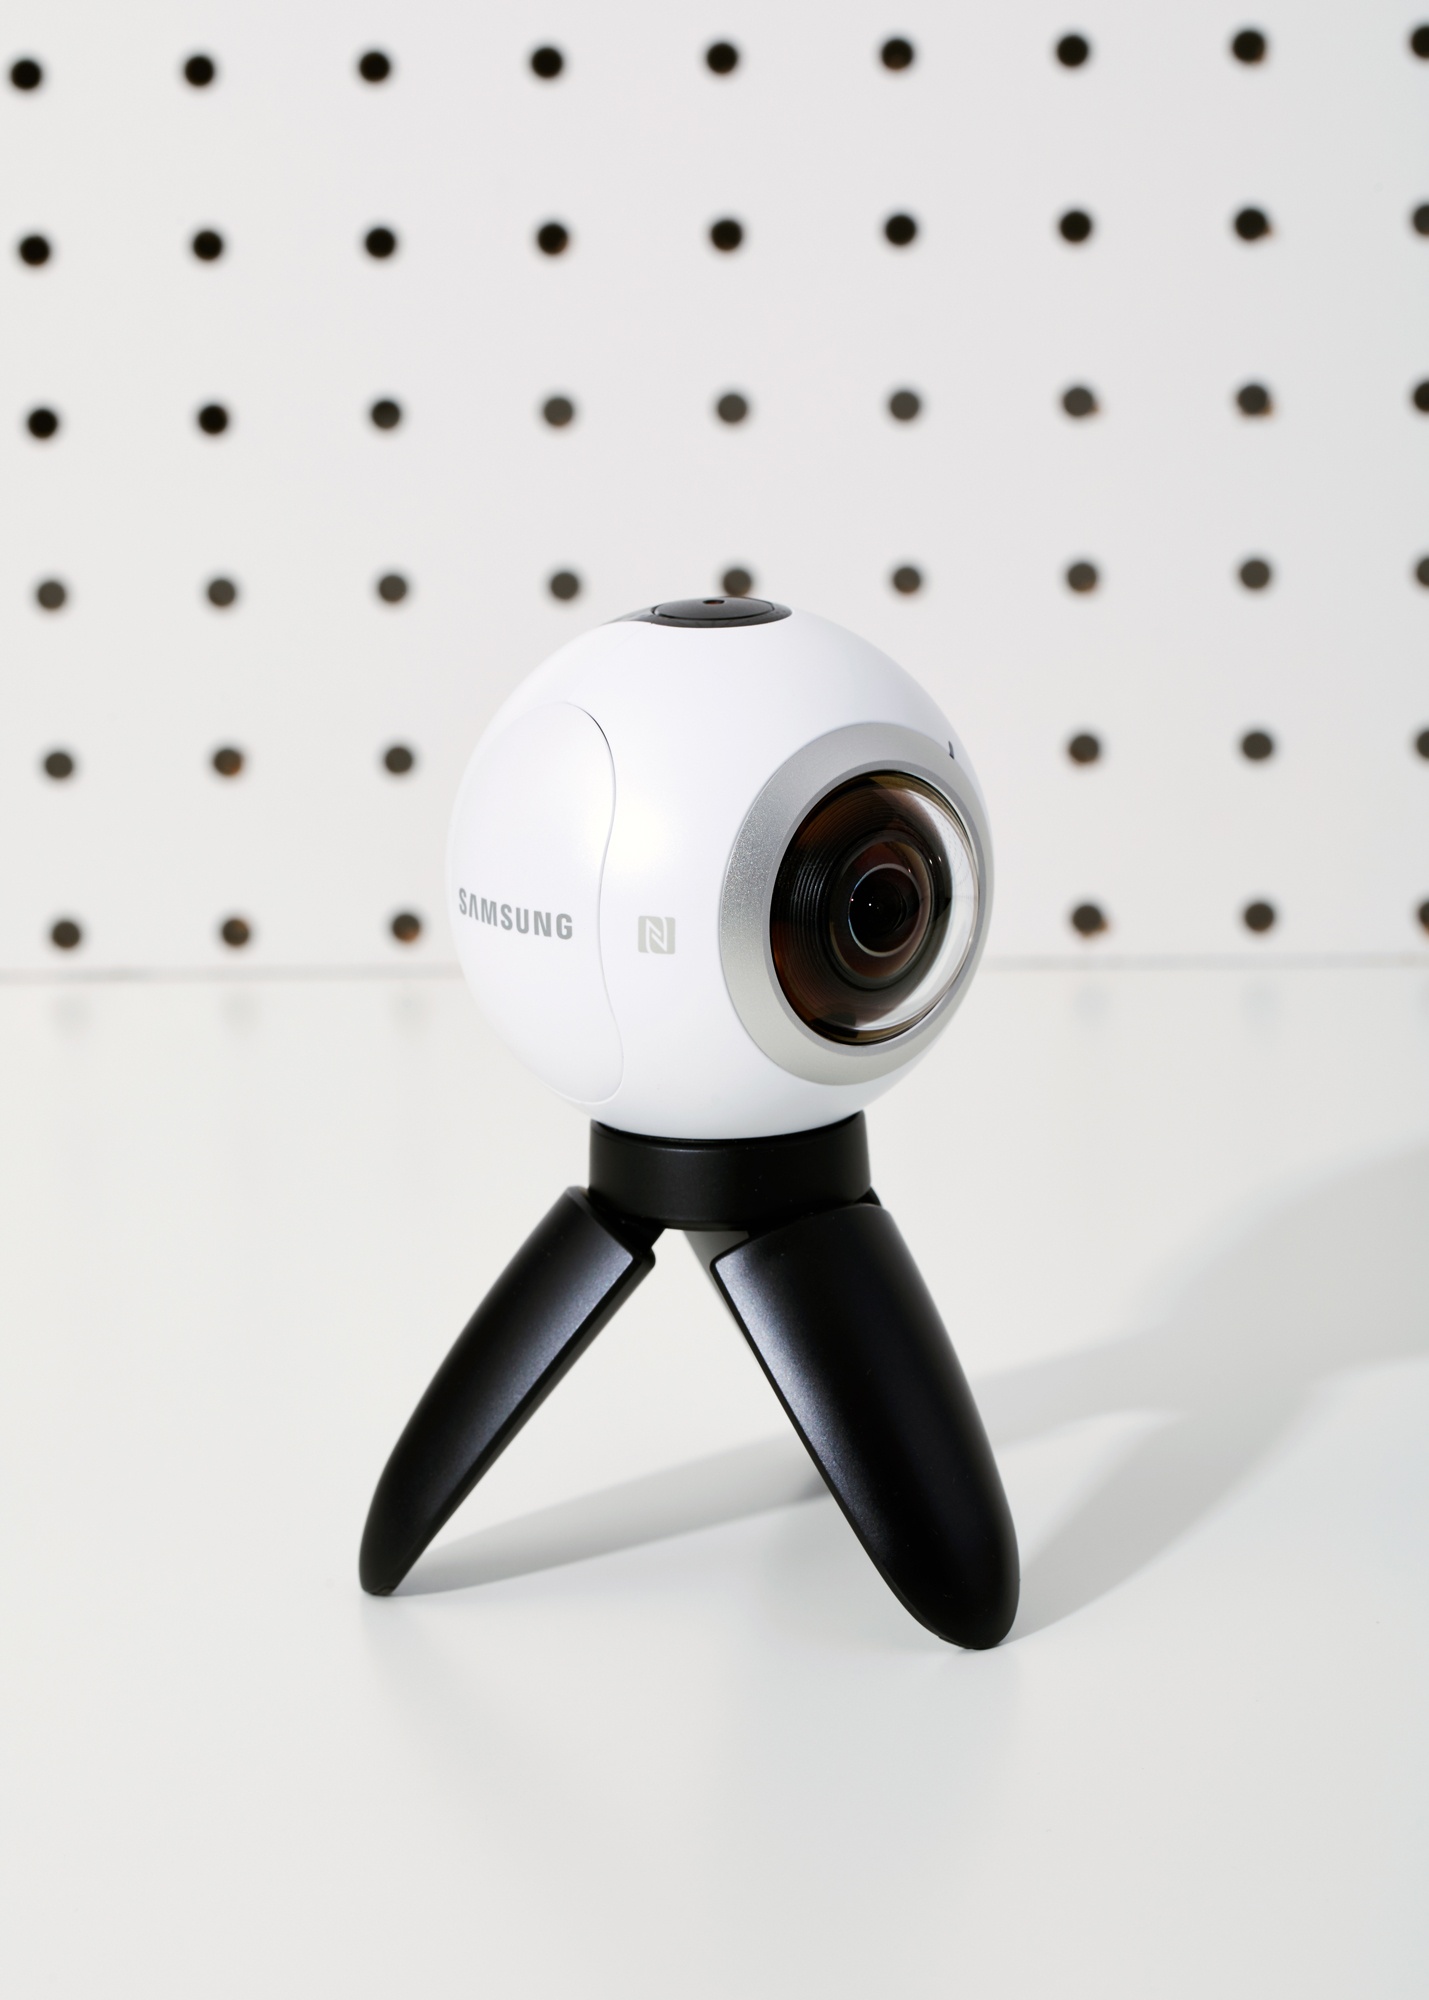 <b>Samsung Gear 360</b><br> Samsung has given these cameras to <i>New York Times</i> and Reuters journalists who are producing 360° news coverage.